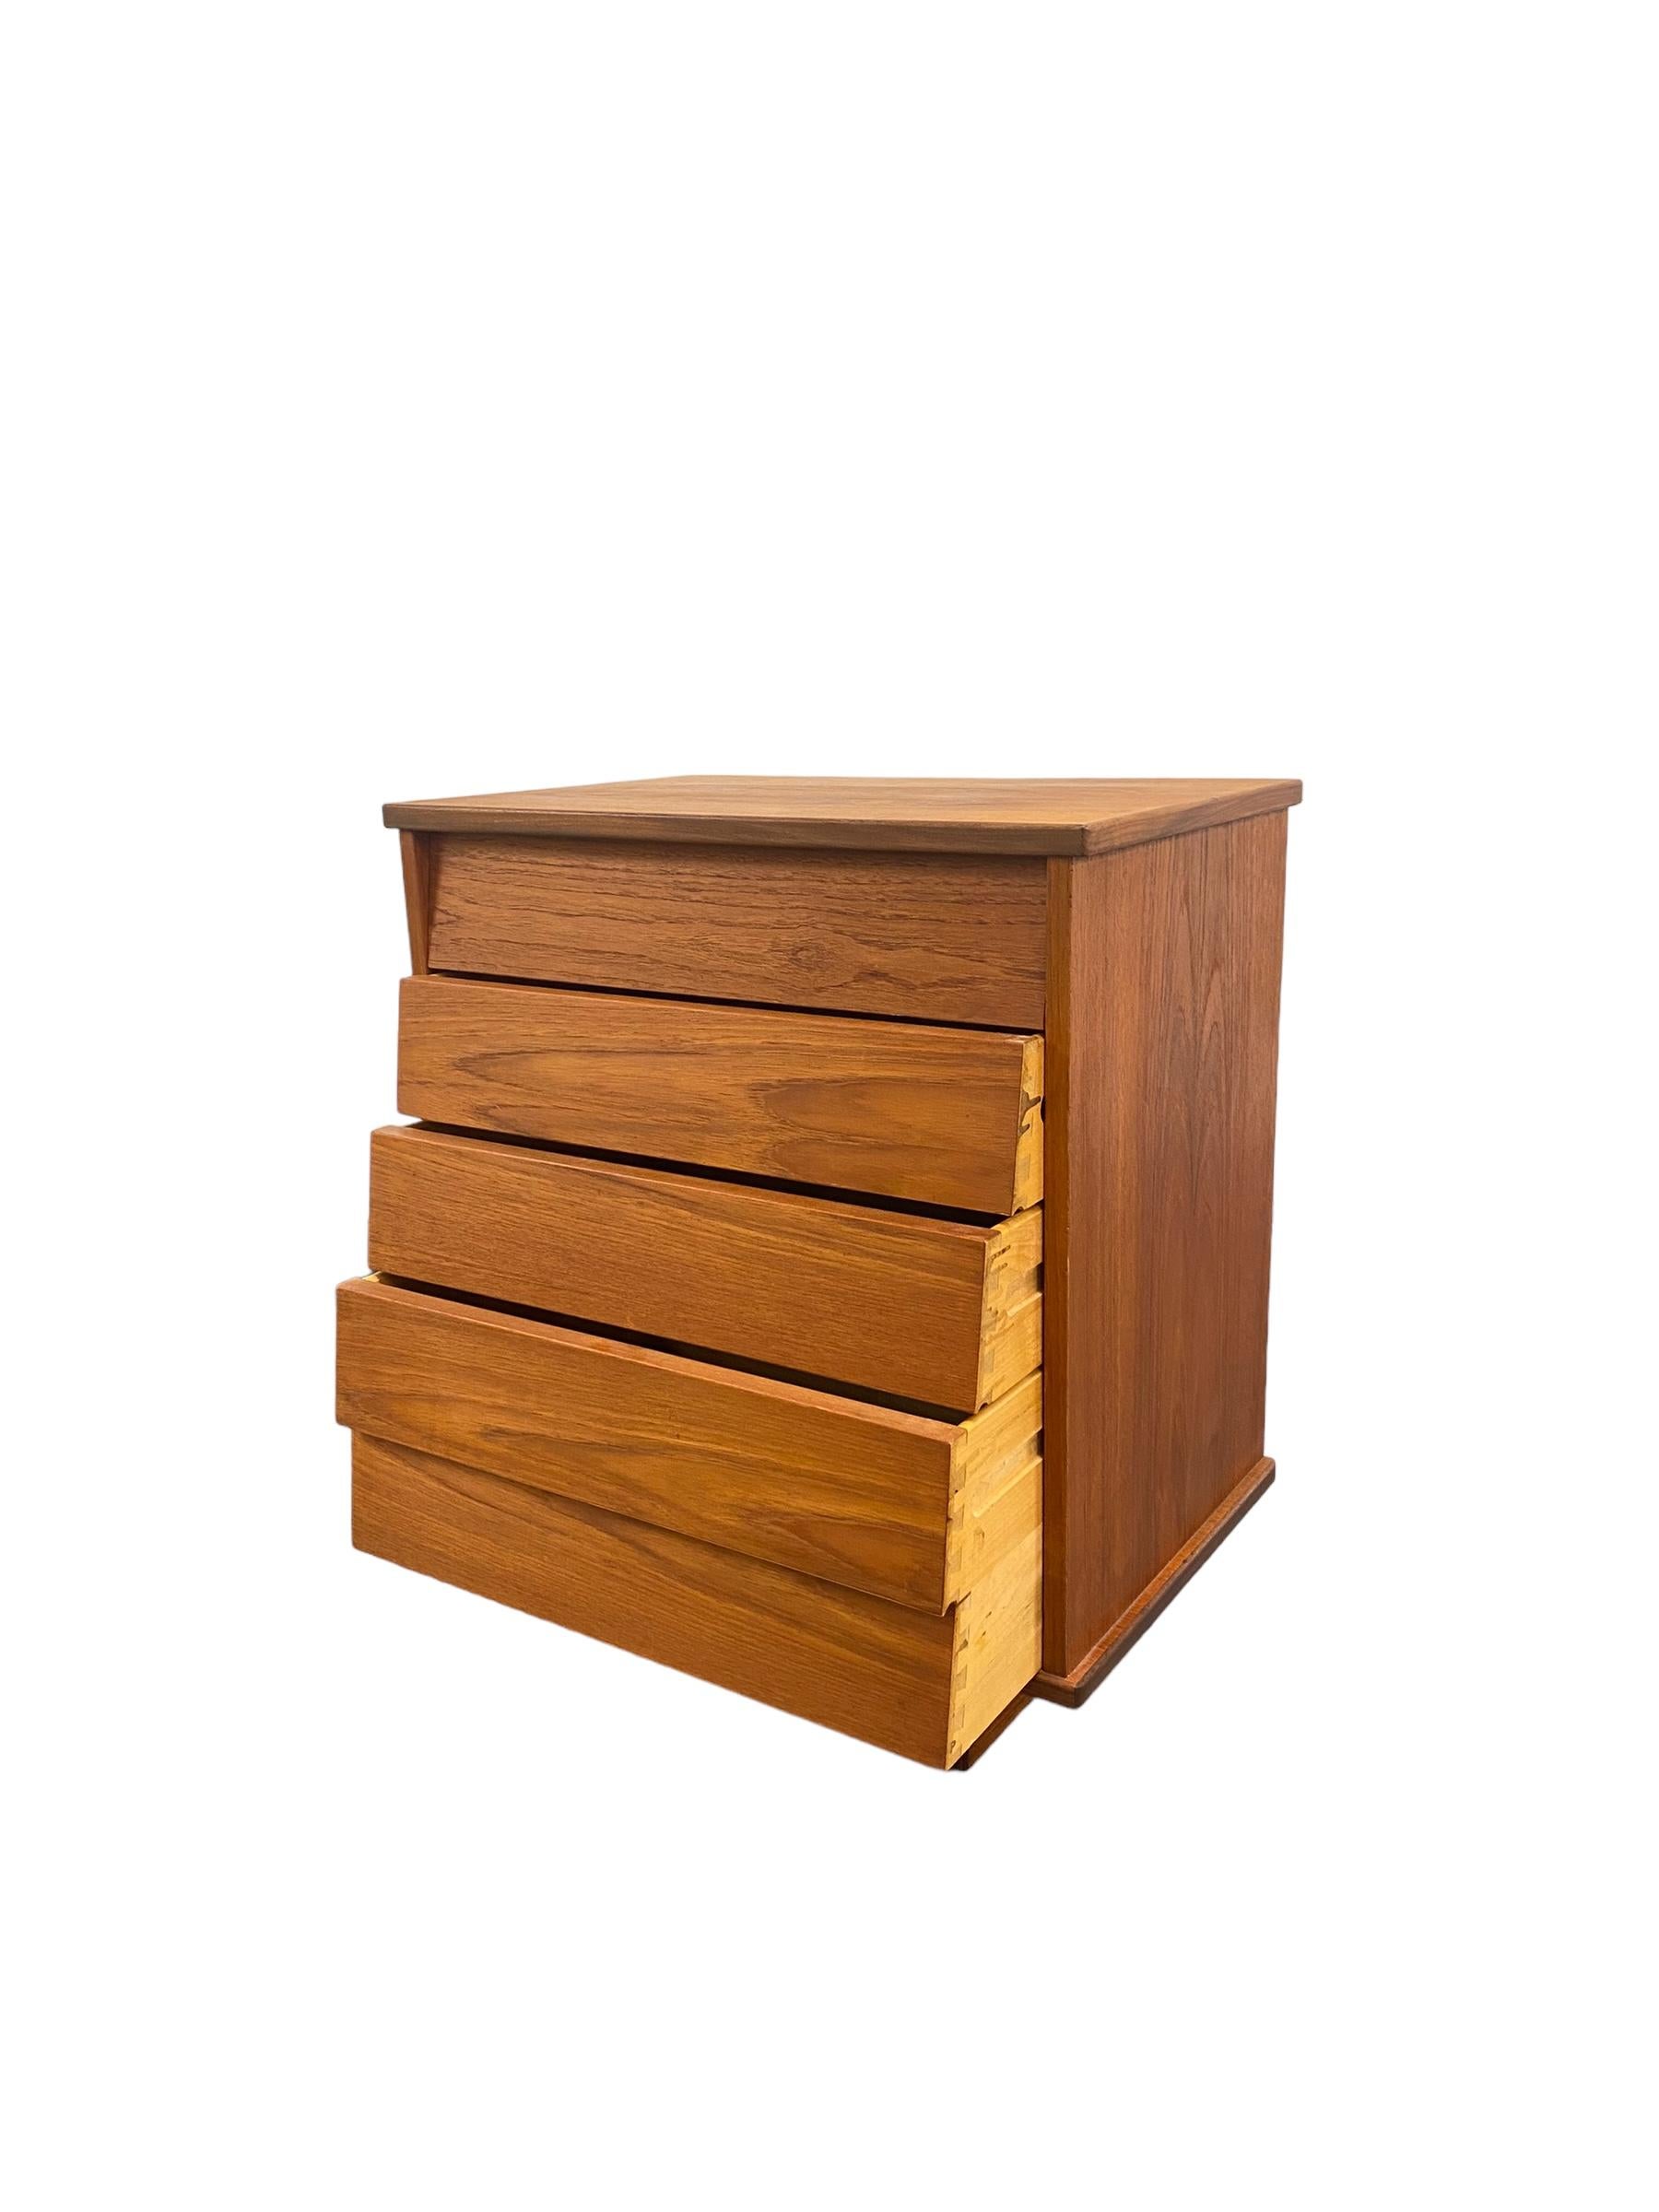 A very elegant and distinct teak drawer/sideboard designed by Ilmari Tapiovaara and manufactured by Asko in Finland in the 1950s. One of the most iconic designs by Ilmari Tapiovaara, who was one of the leading names in the golden age of Finnish